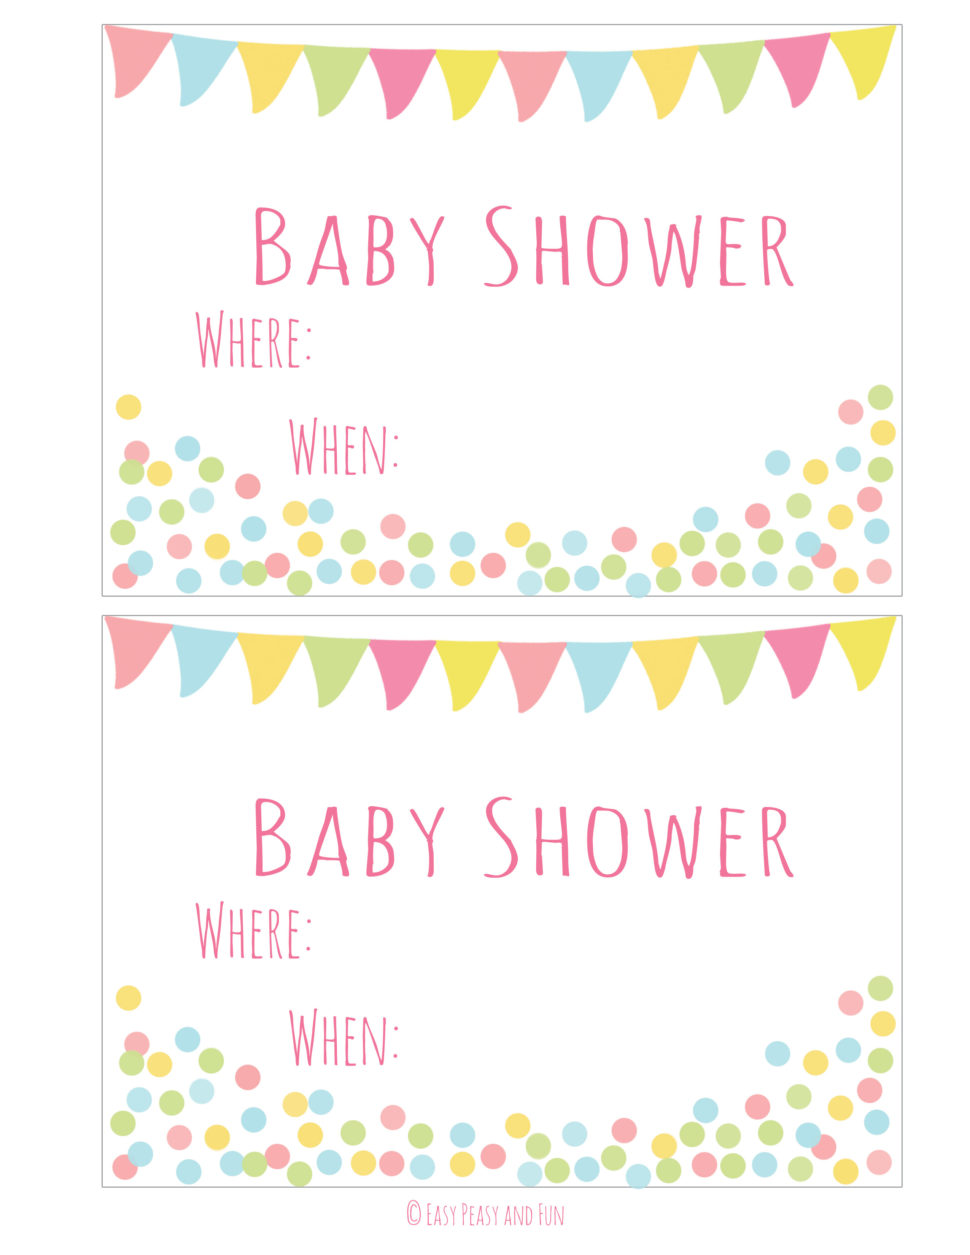 Medium Size of Baby Shower:sturdy Baby Shower Invitation Template Image Concepts Baby Shower Favors To Make Princess Baby Shower Adornos De Baby Shower Baby Shower Gift List